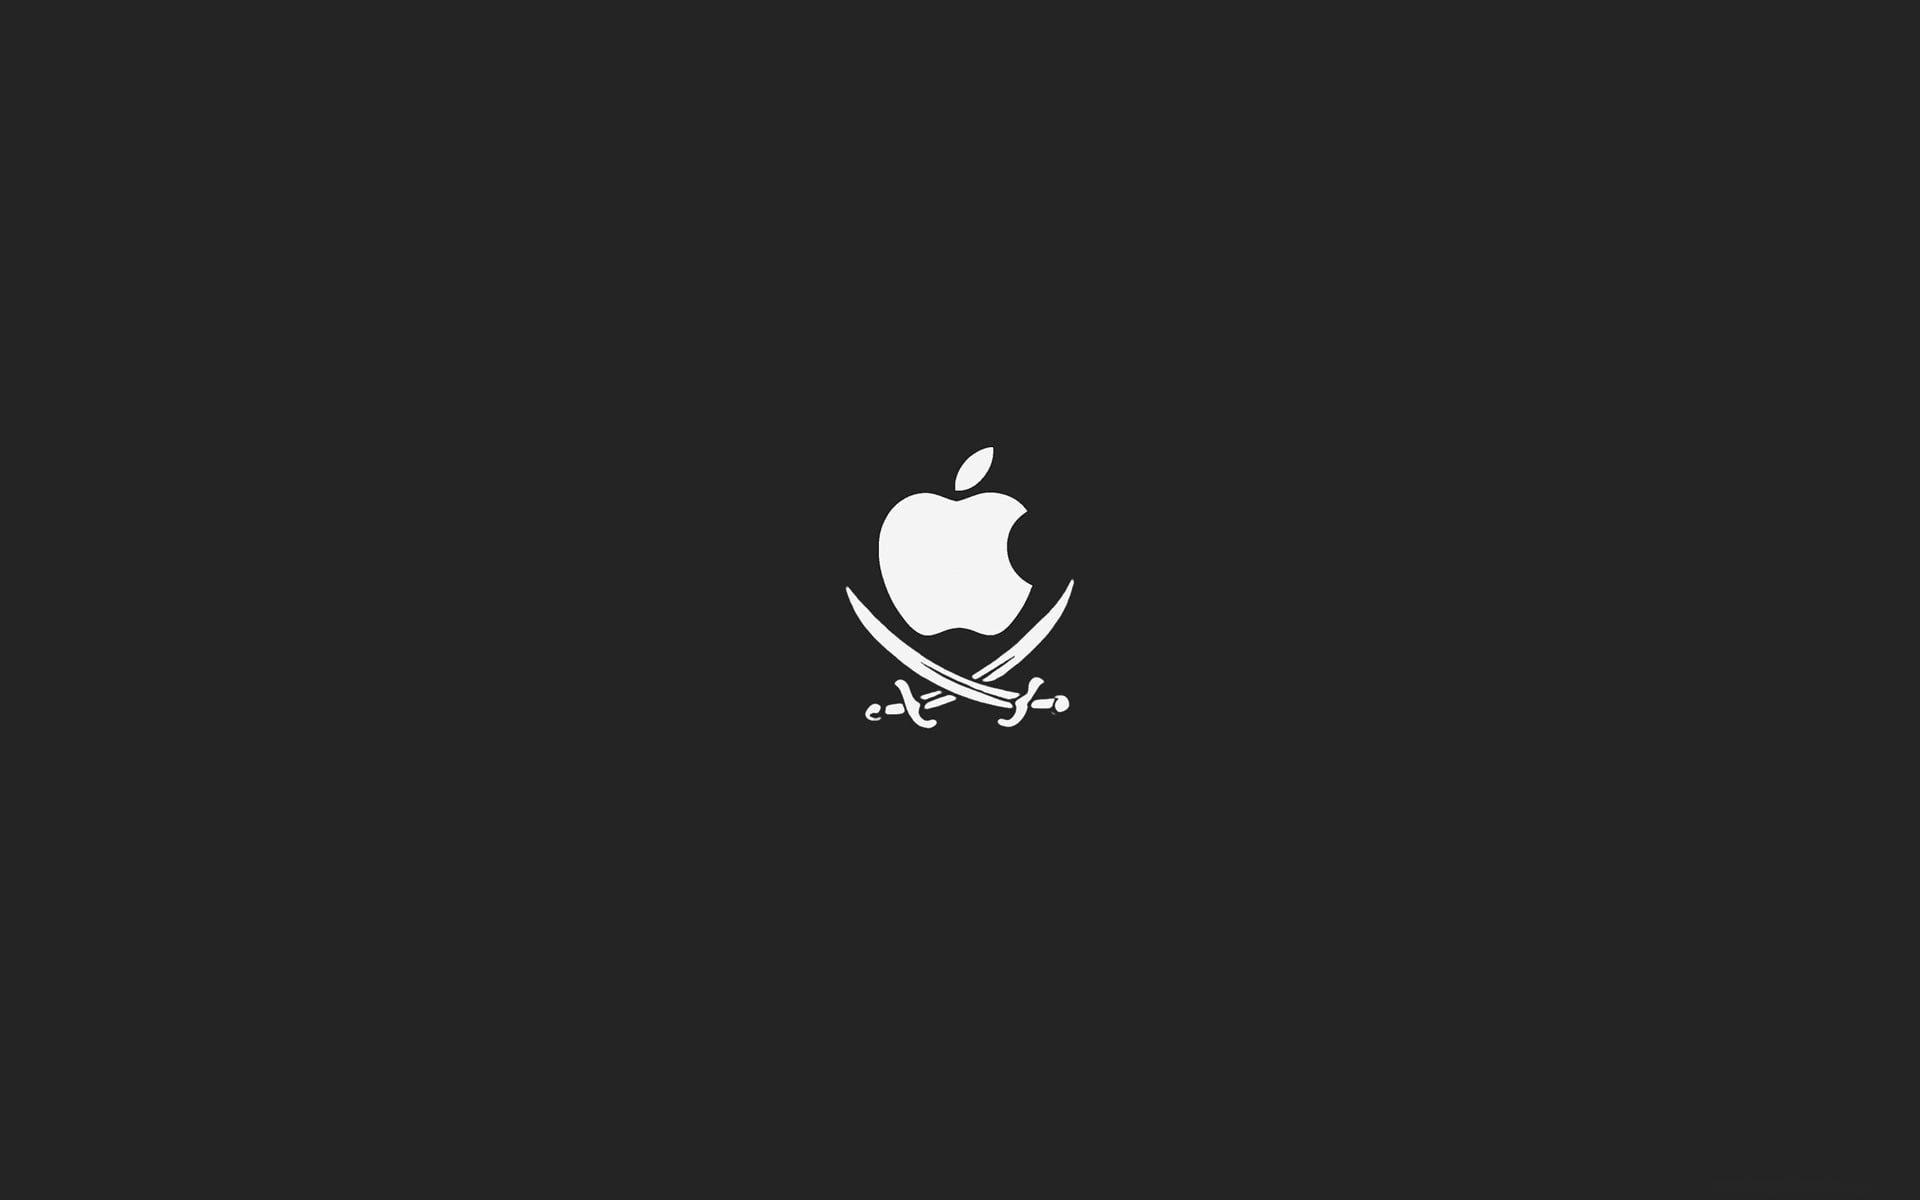 Apple and two sword logo, pirate, swords, copy space, illuminated